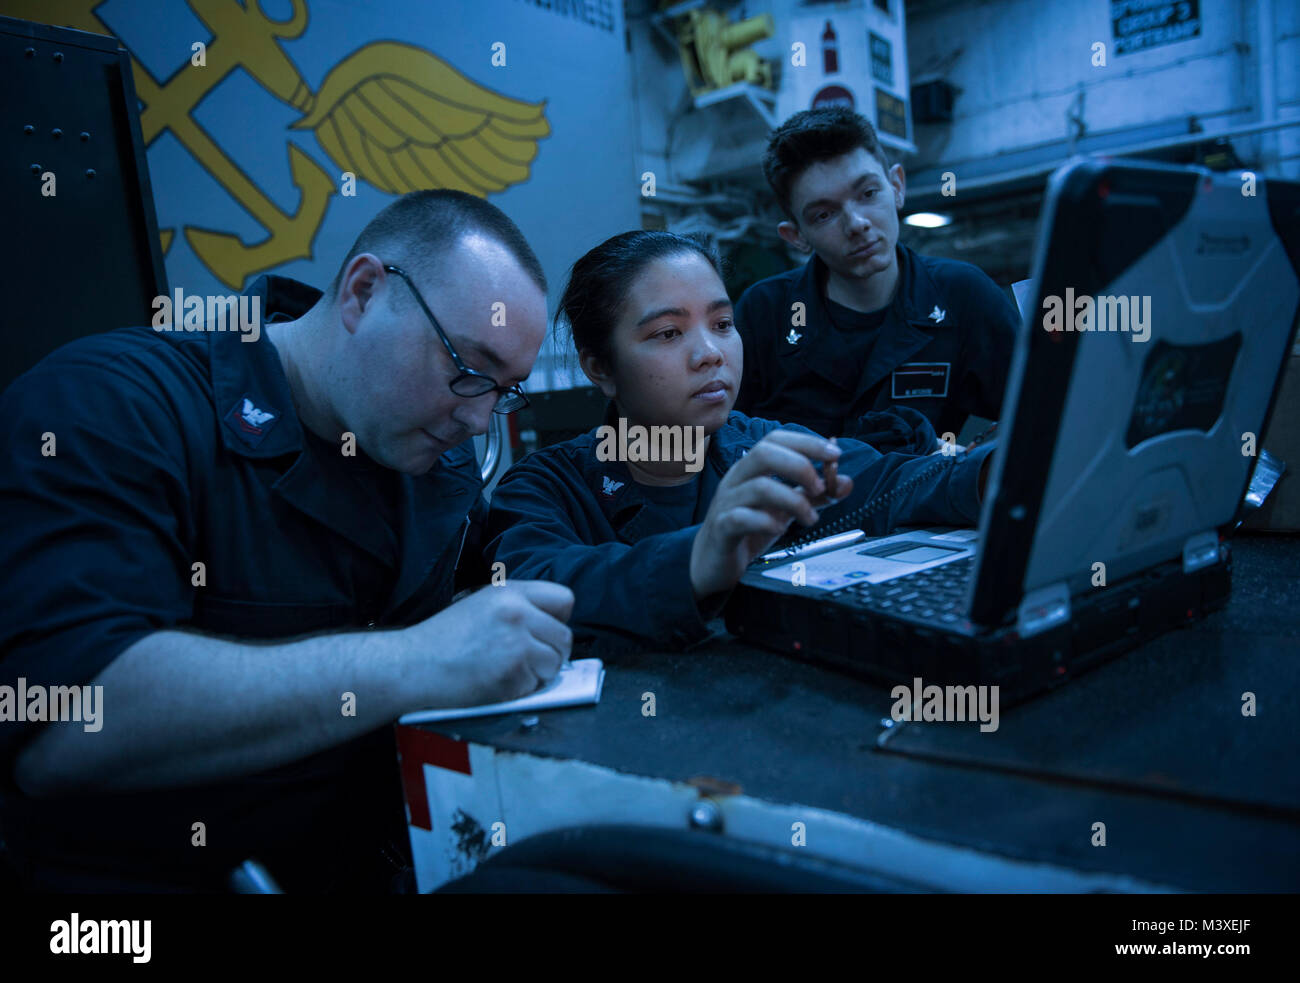 180206-N-WF272-150 SOTUH CHINA SEA (Feb. 6, 2018) Aviation Support Equipment Technician 2nd Class Daniel Carrigan, left, from Warwick, Ill., Aviation Support Equipment Technician 2nd Class Vanessa Castro, center, from San Diego, and Aviation Machinist’s Mate 3rd Class Moses Mitchum, from Oklahoma City, verify parts used during equipment maintenance in the hangar bay of the amphibious assault ship USS Bonhomme Richard (LHD 6). Bonhomme Richard is operating in the Indo-Asia-Pacific region as part of a regularly scheduled patrol and provides a rapid-response capability in the event of a regional  Stock Photo